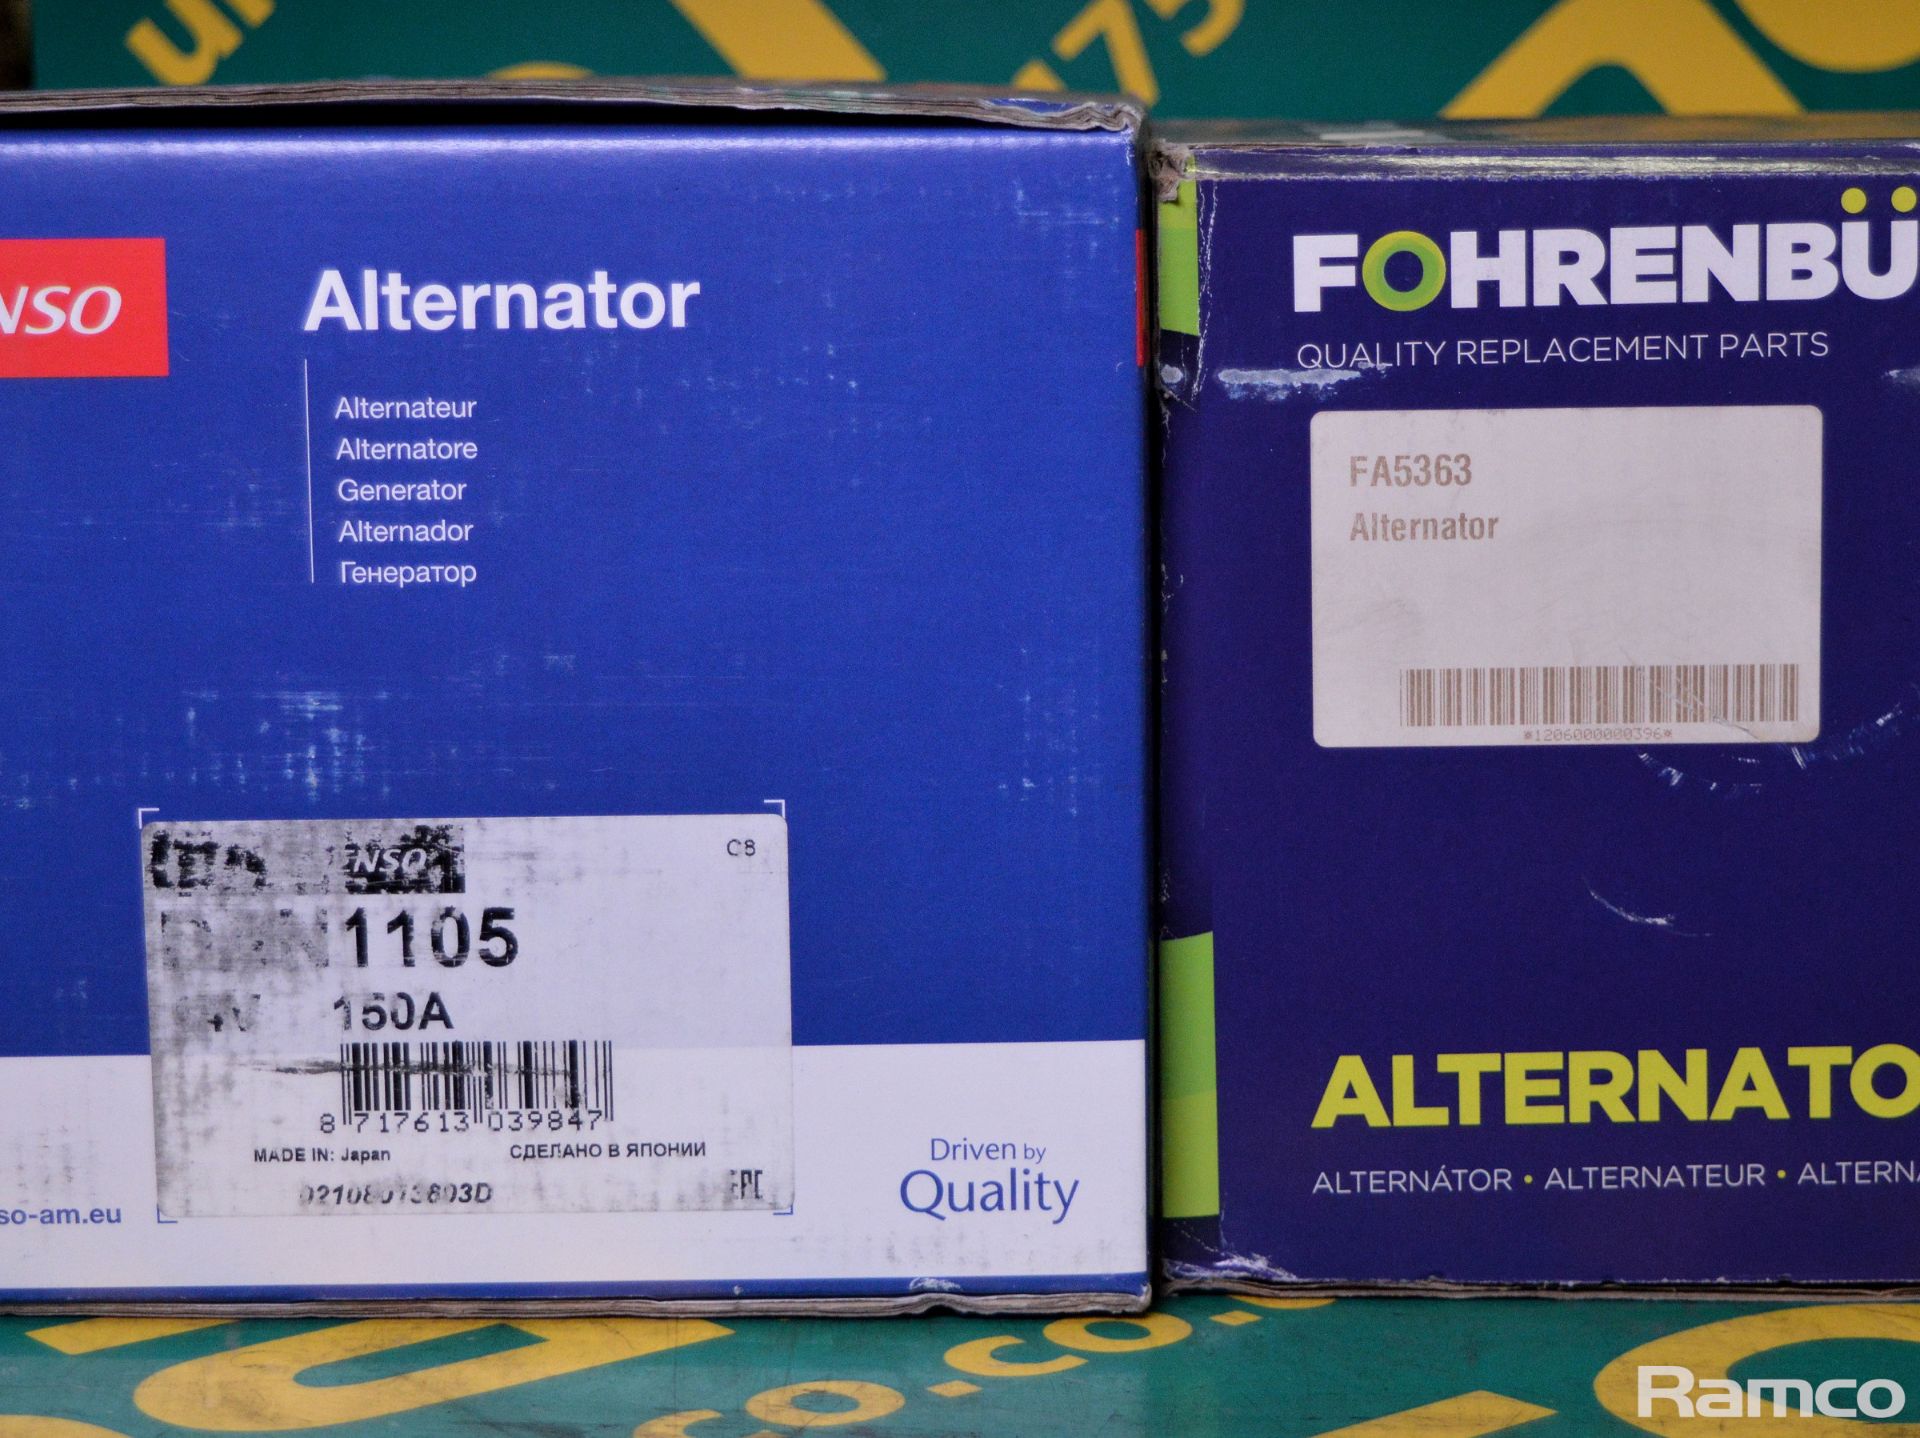 4x Alternators - 1x Denso & 3x Fohrenbuhl - please check pictures for models - Image 2 of 3